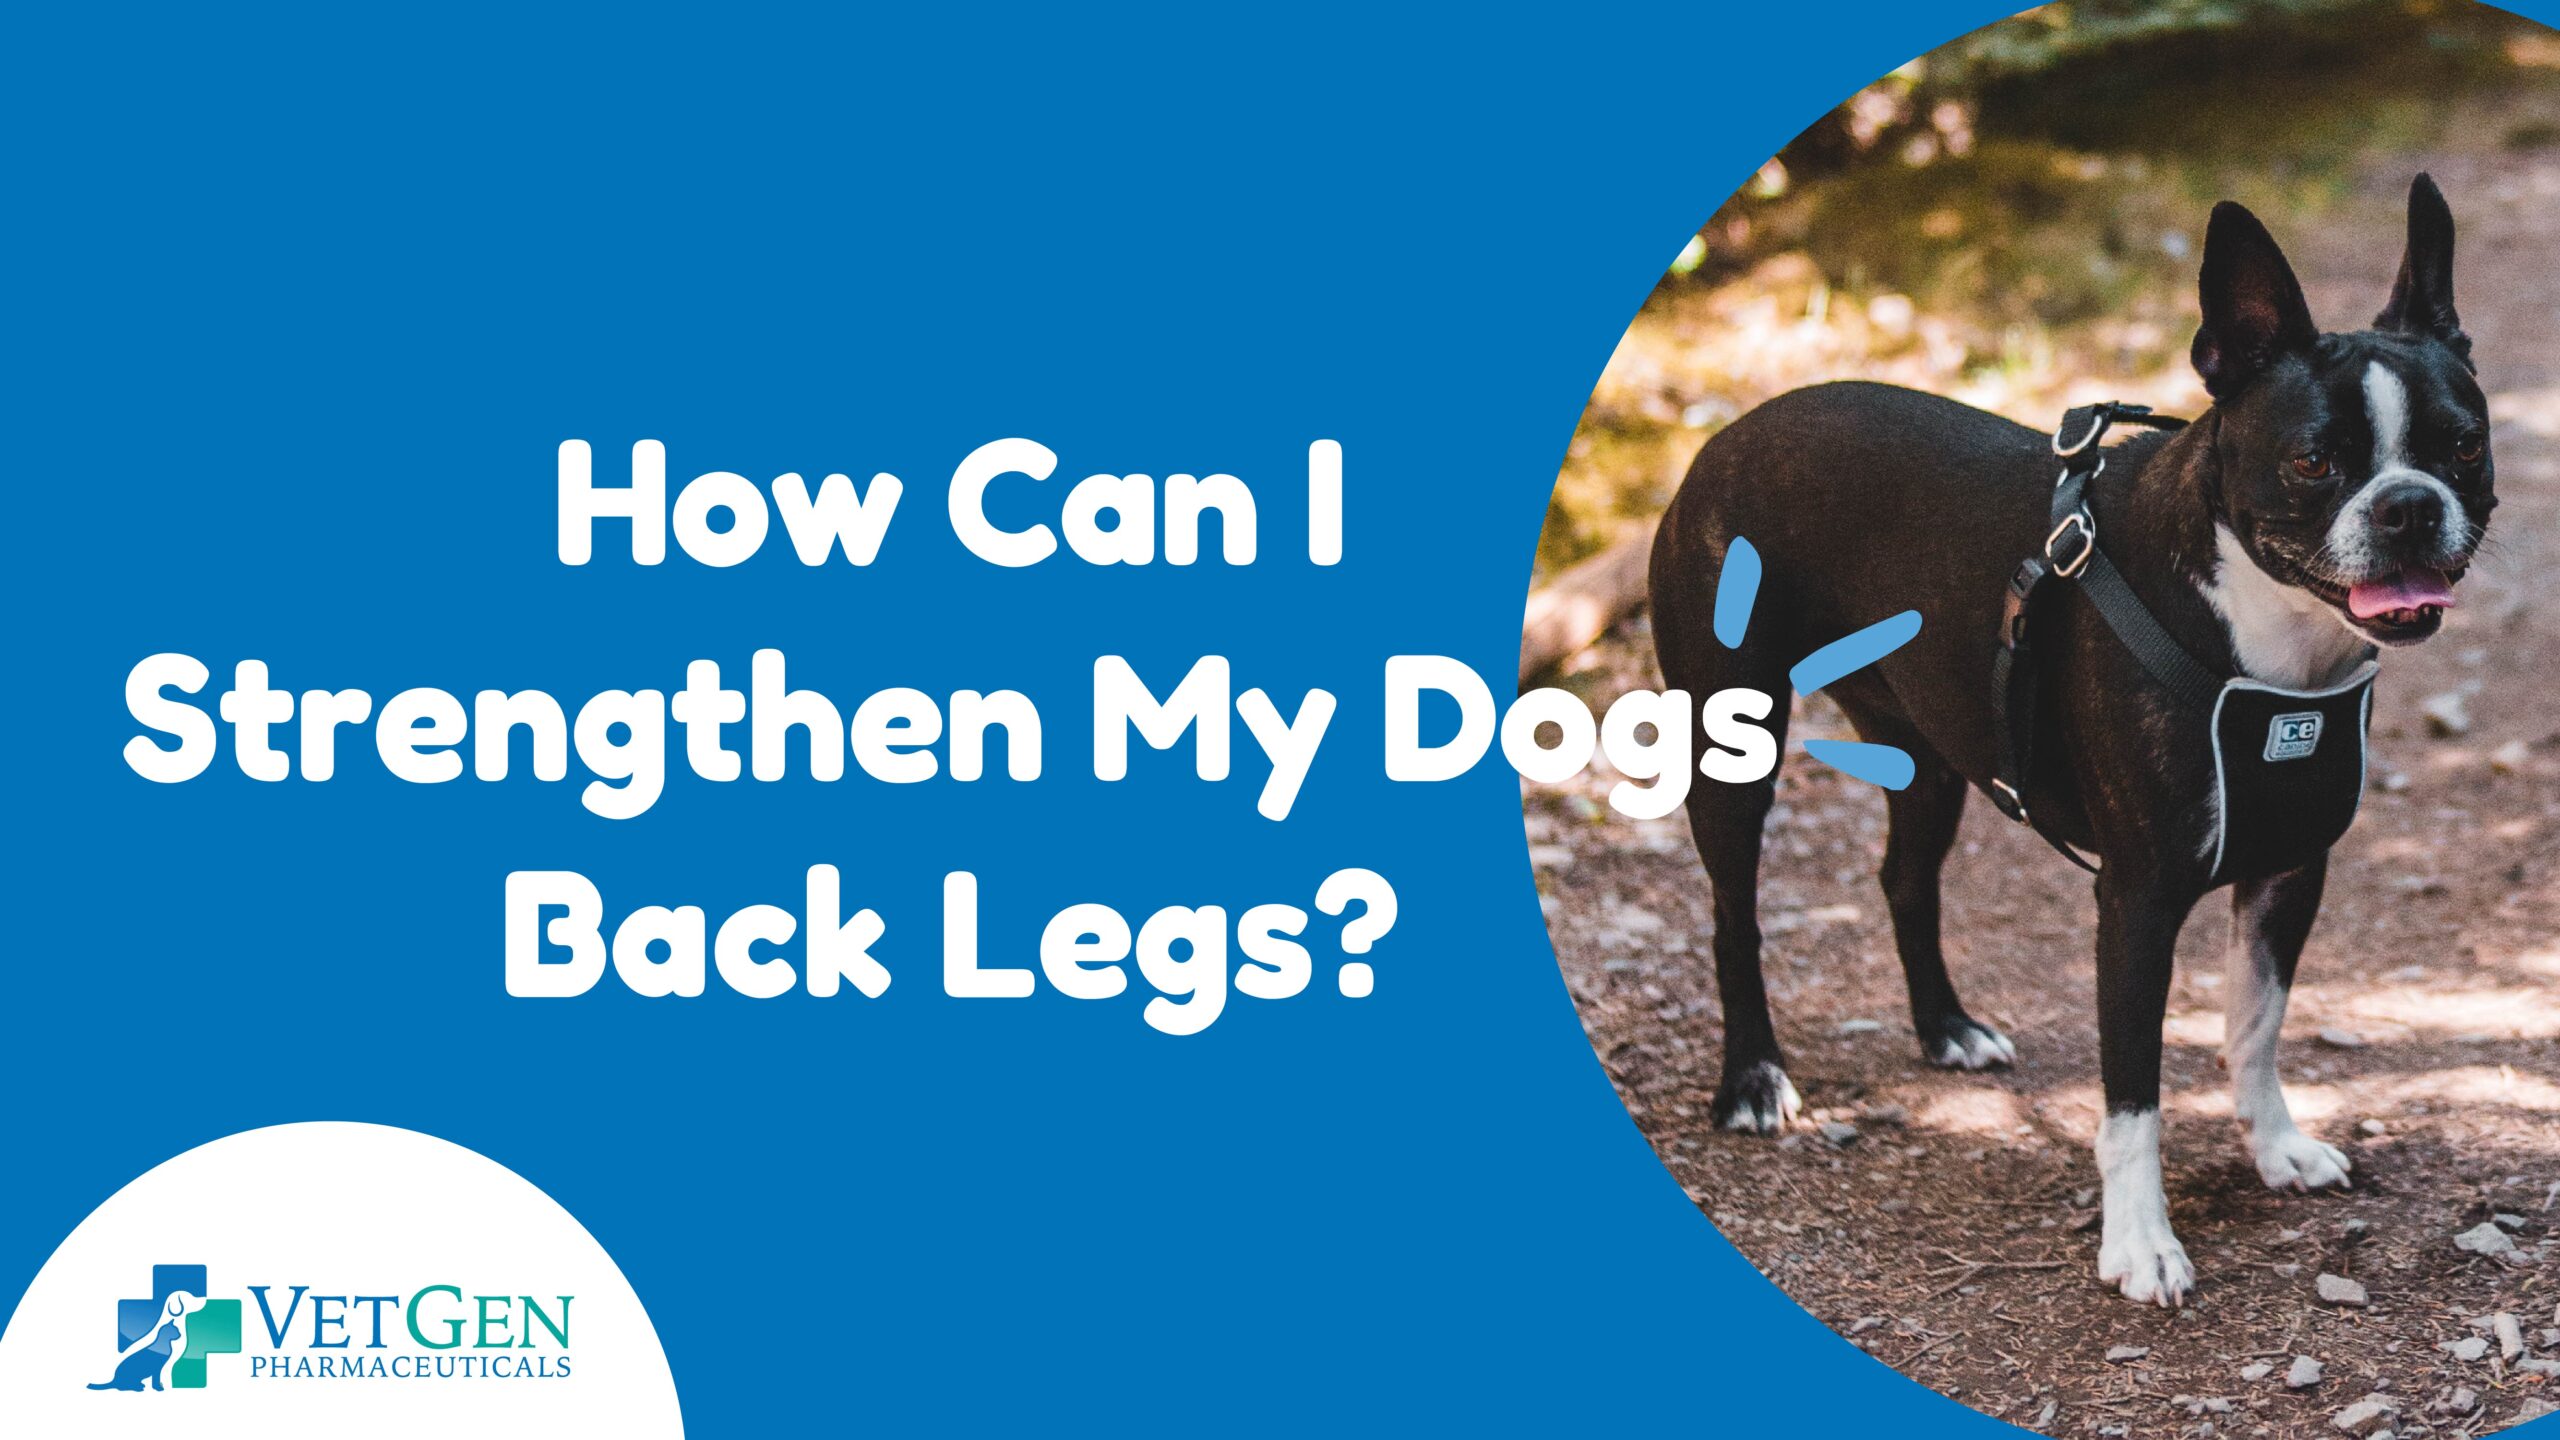 How Can I Strengthen My Dogs Back Legs